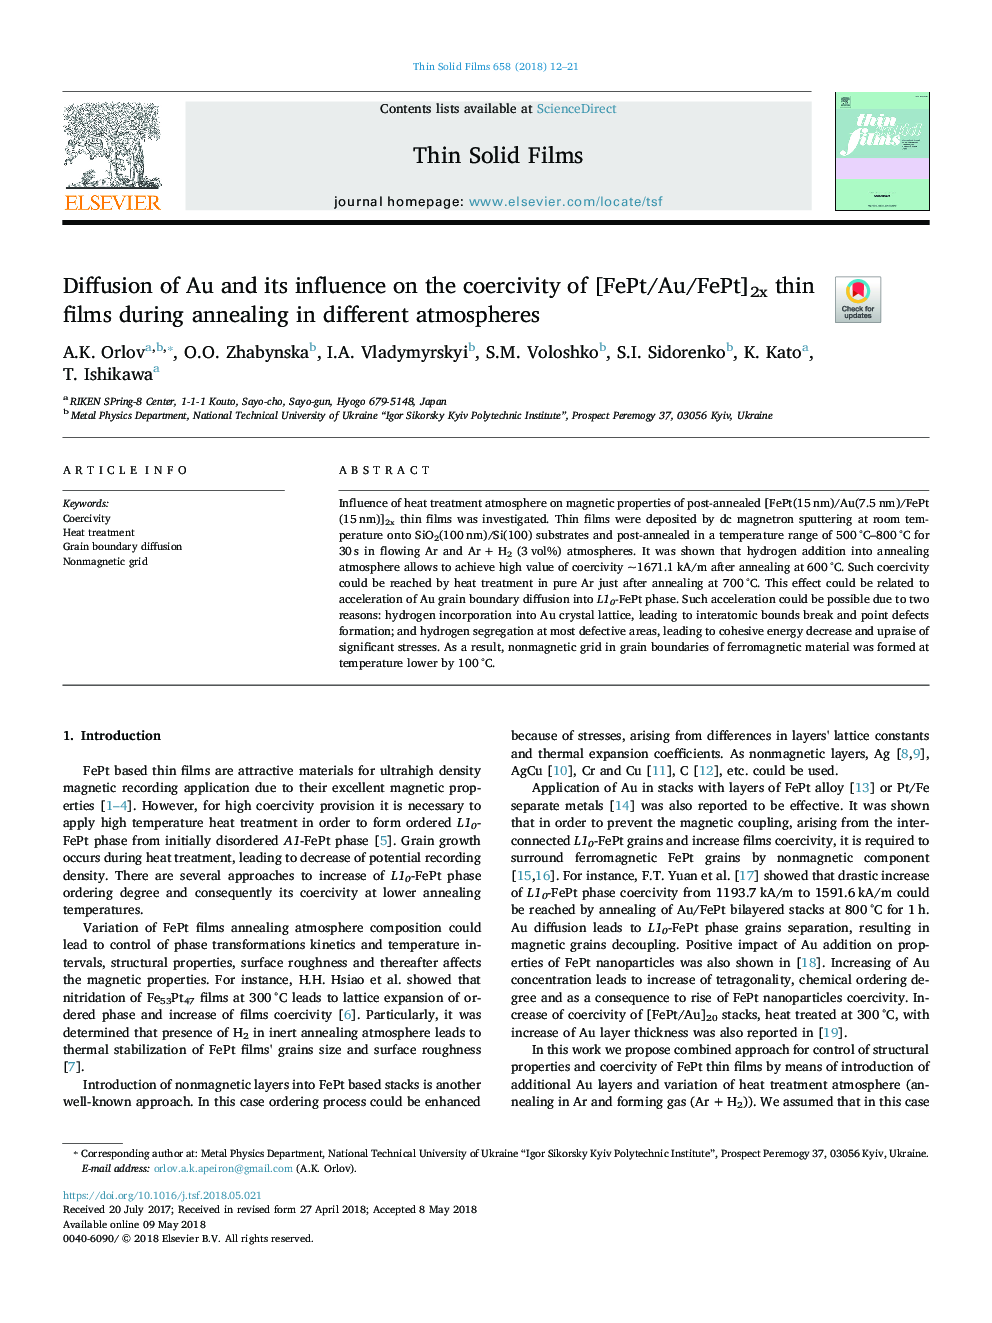 Diffusion of Au and its influence on the coercivity of [FePt/Au/FePt]2x thin films during annealing in different atmospheres